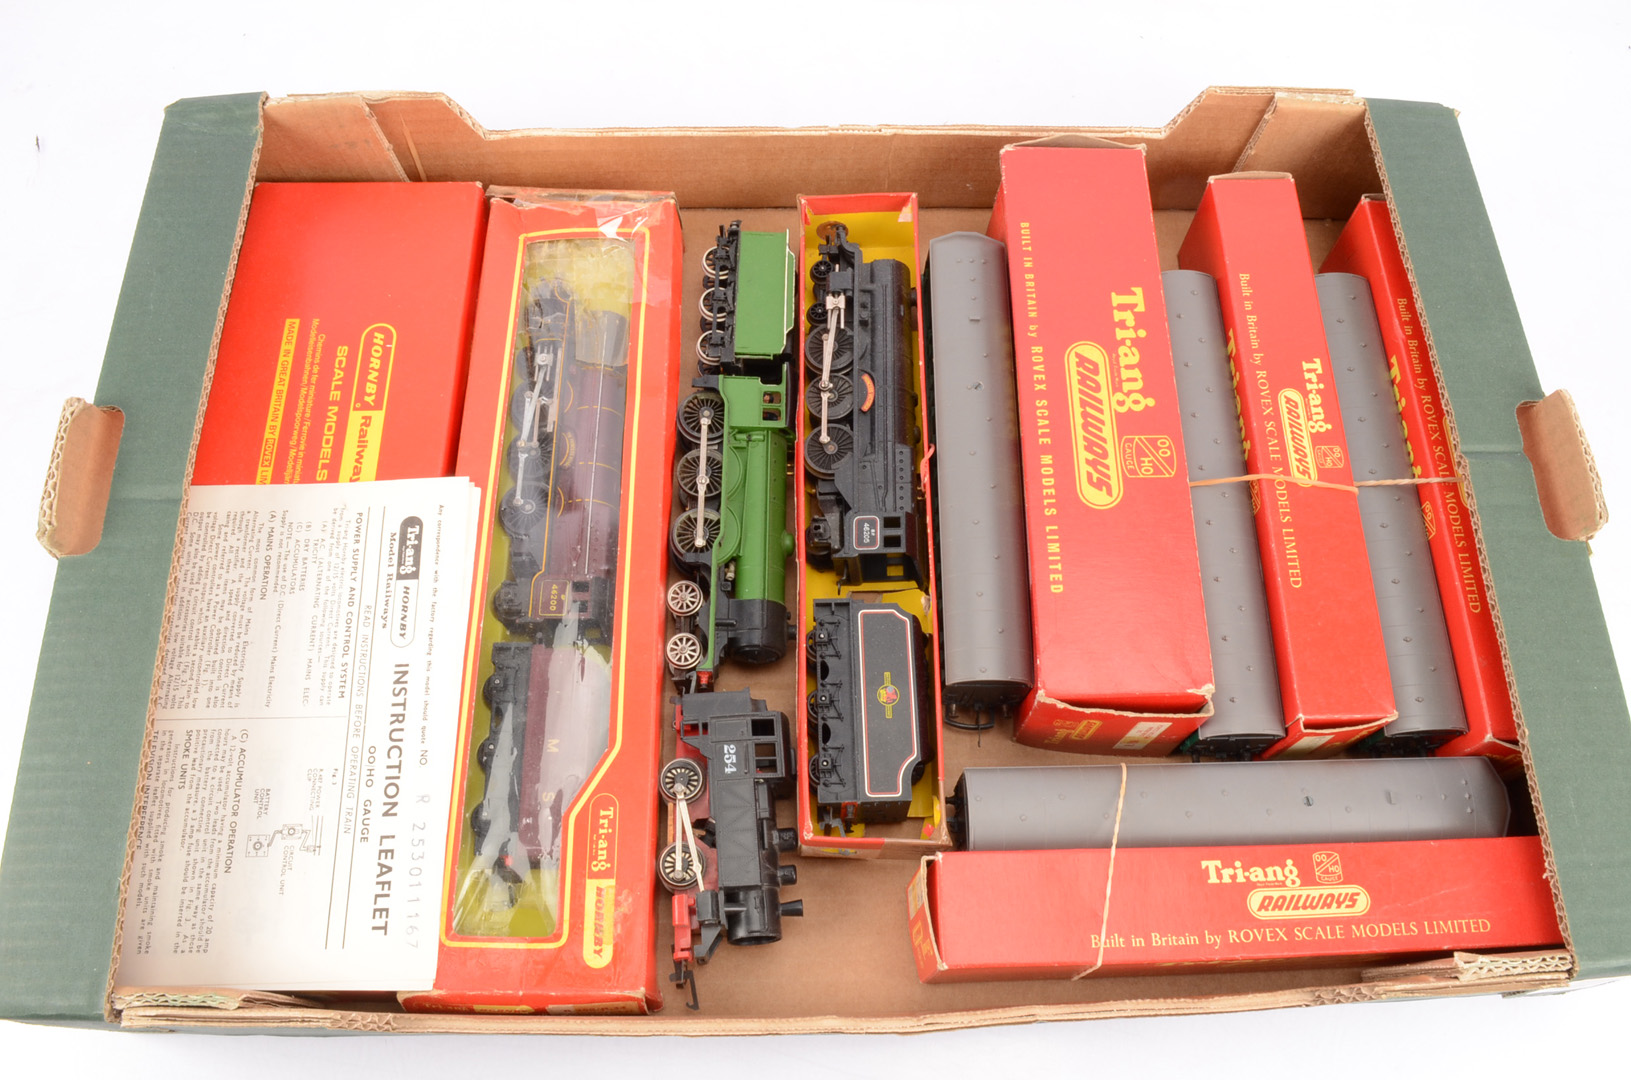 Tri-ang and Tri-ang Hornby and early Hornby 00 Gauge Locomotives and EMU, Tri-ang R156 late issue